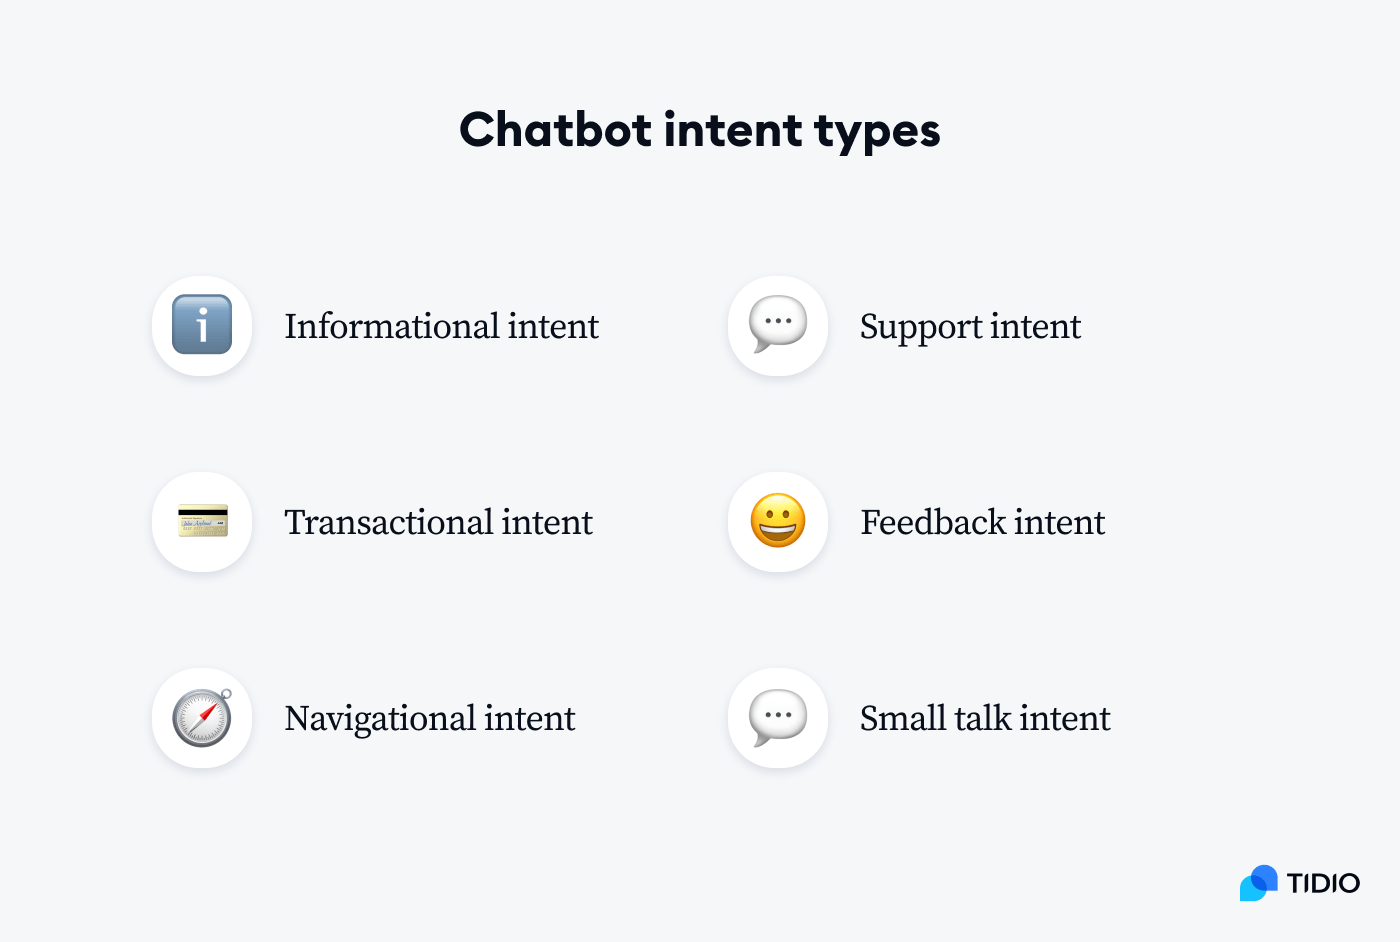 Types of chatbot intents on image